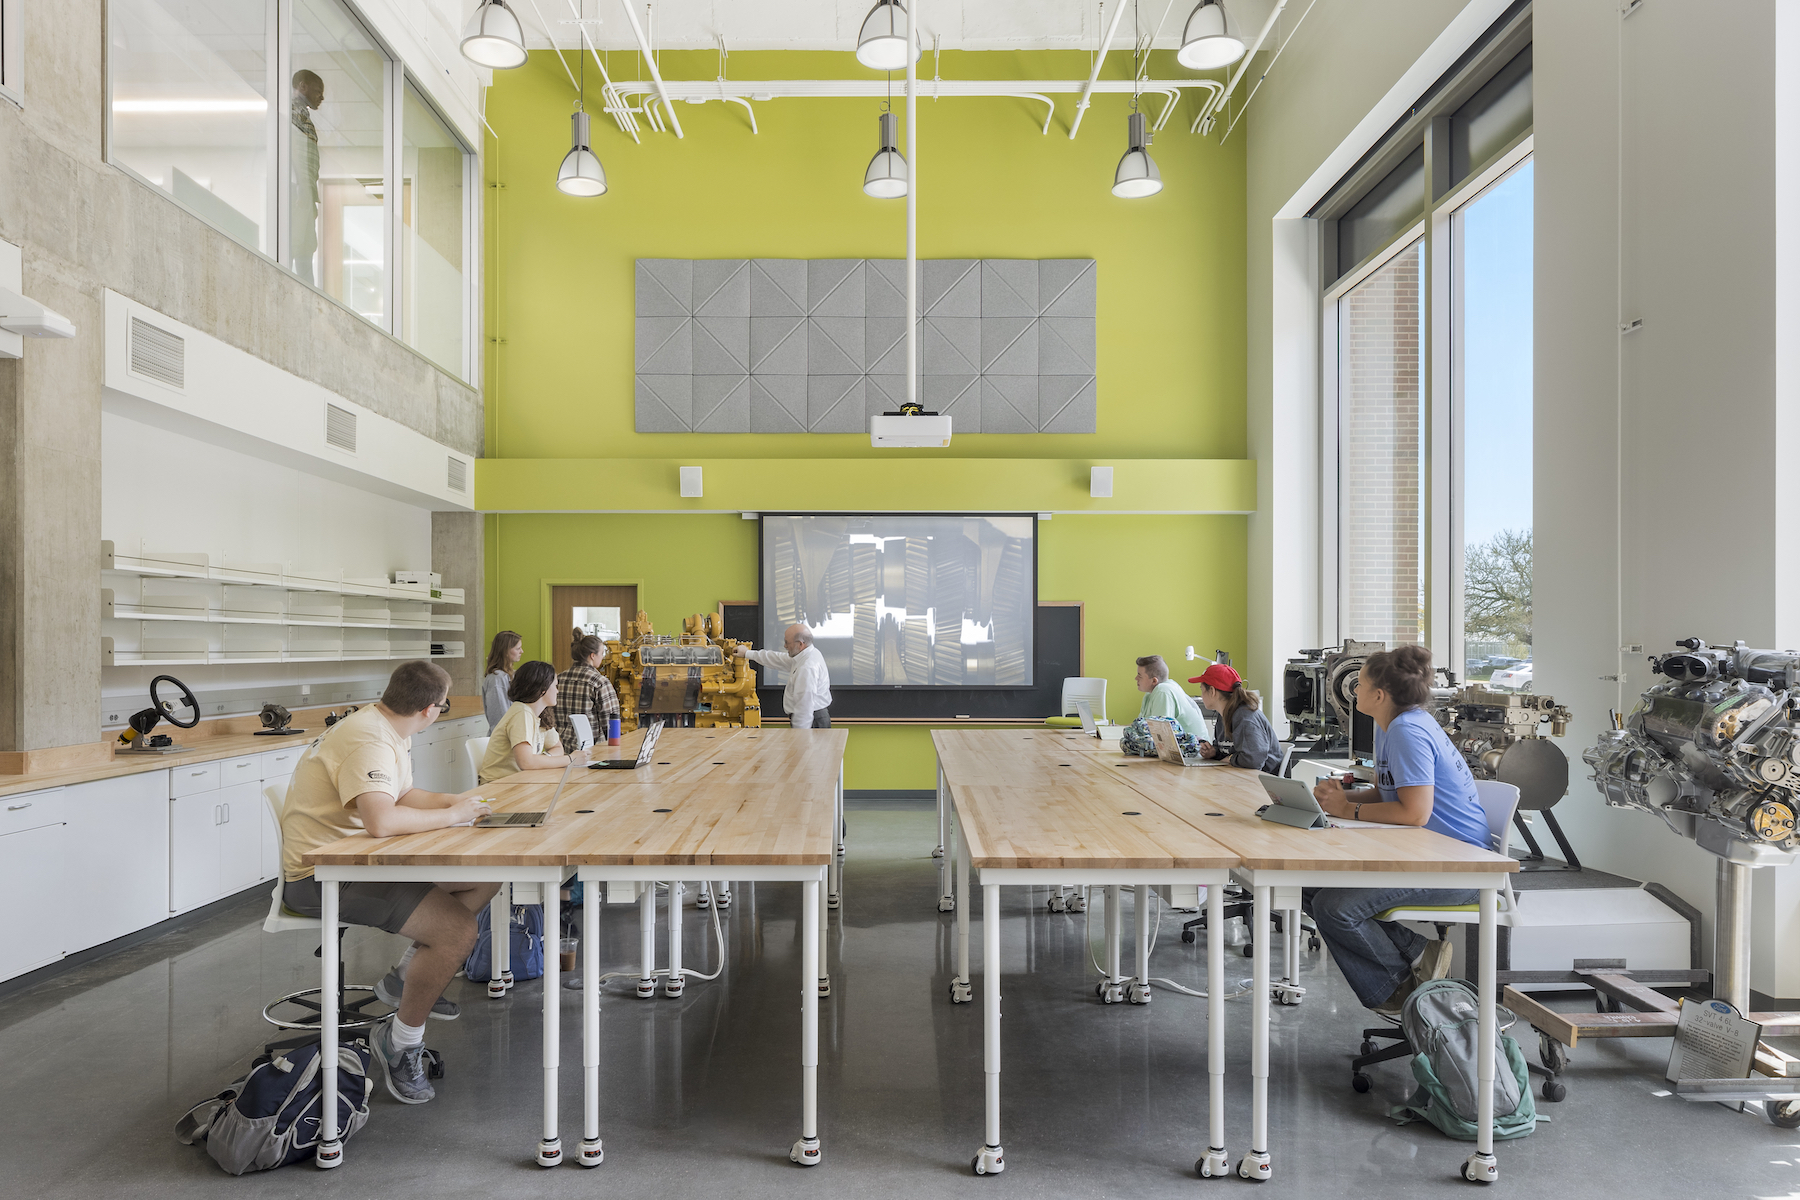 2021 University Giants - Top architecture, engineering, and construction firms in the higher education sector Photo 2021 Feinknopf Photography Brad Feinknopf, courtesy Flad Architects